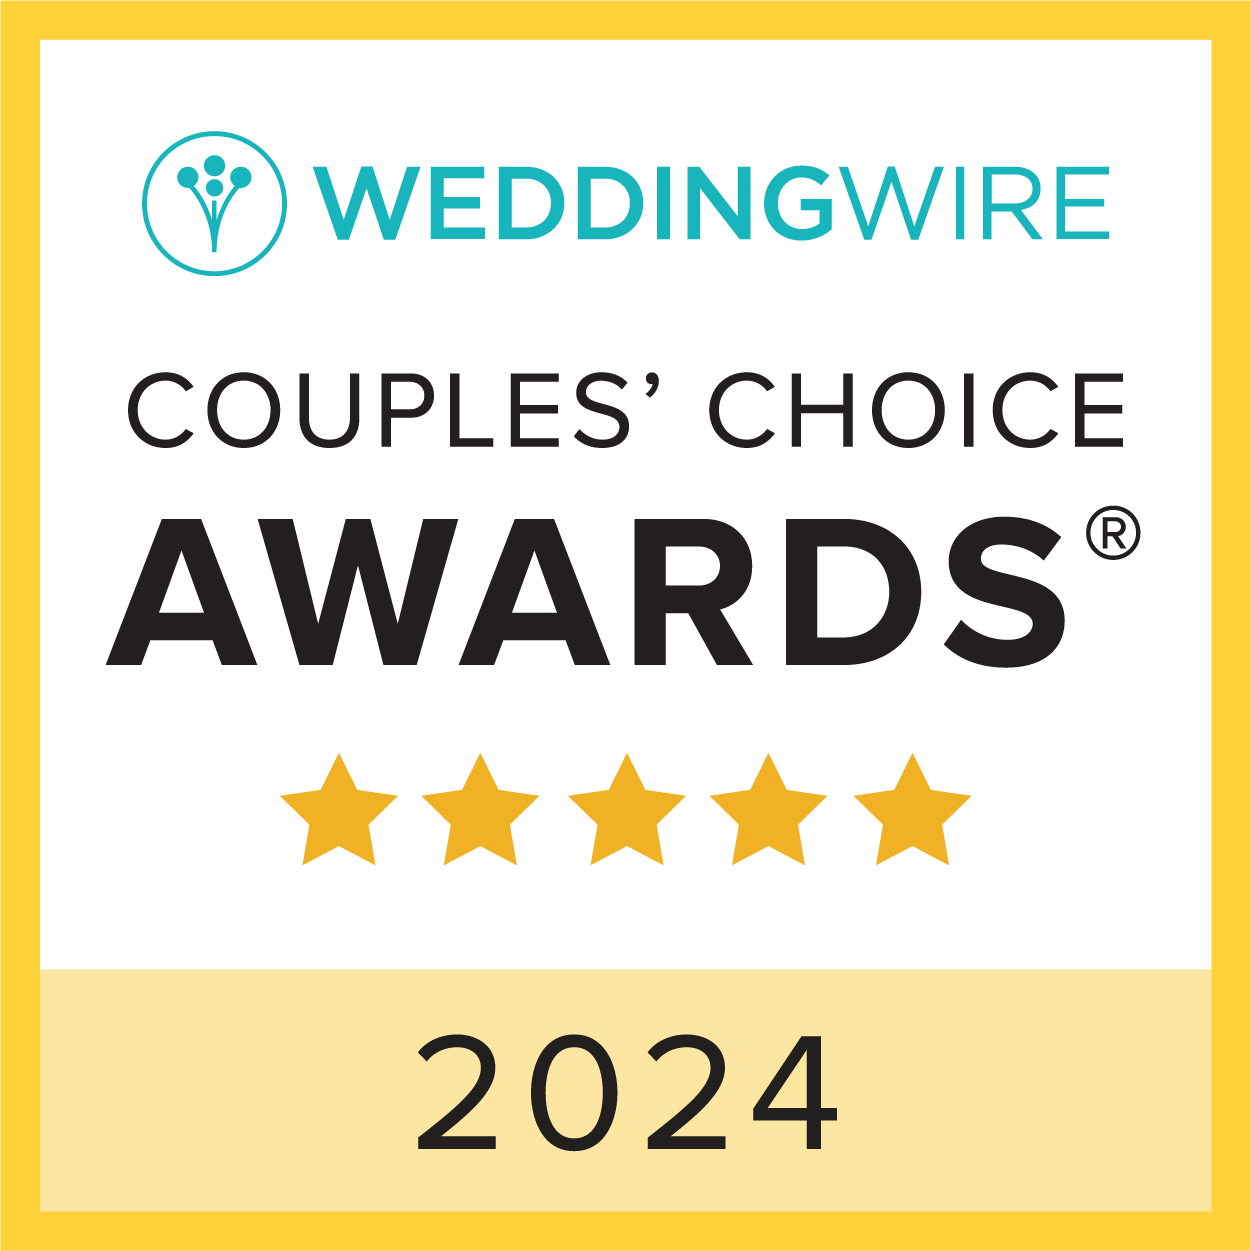 Voted wedding wire couples' choice award in 2024